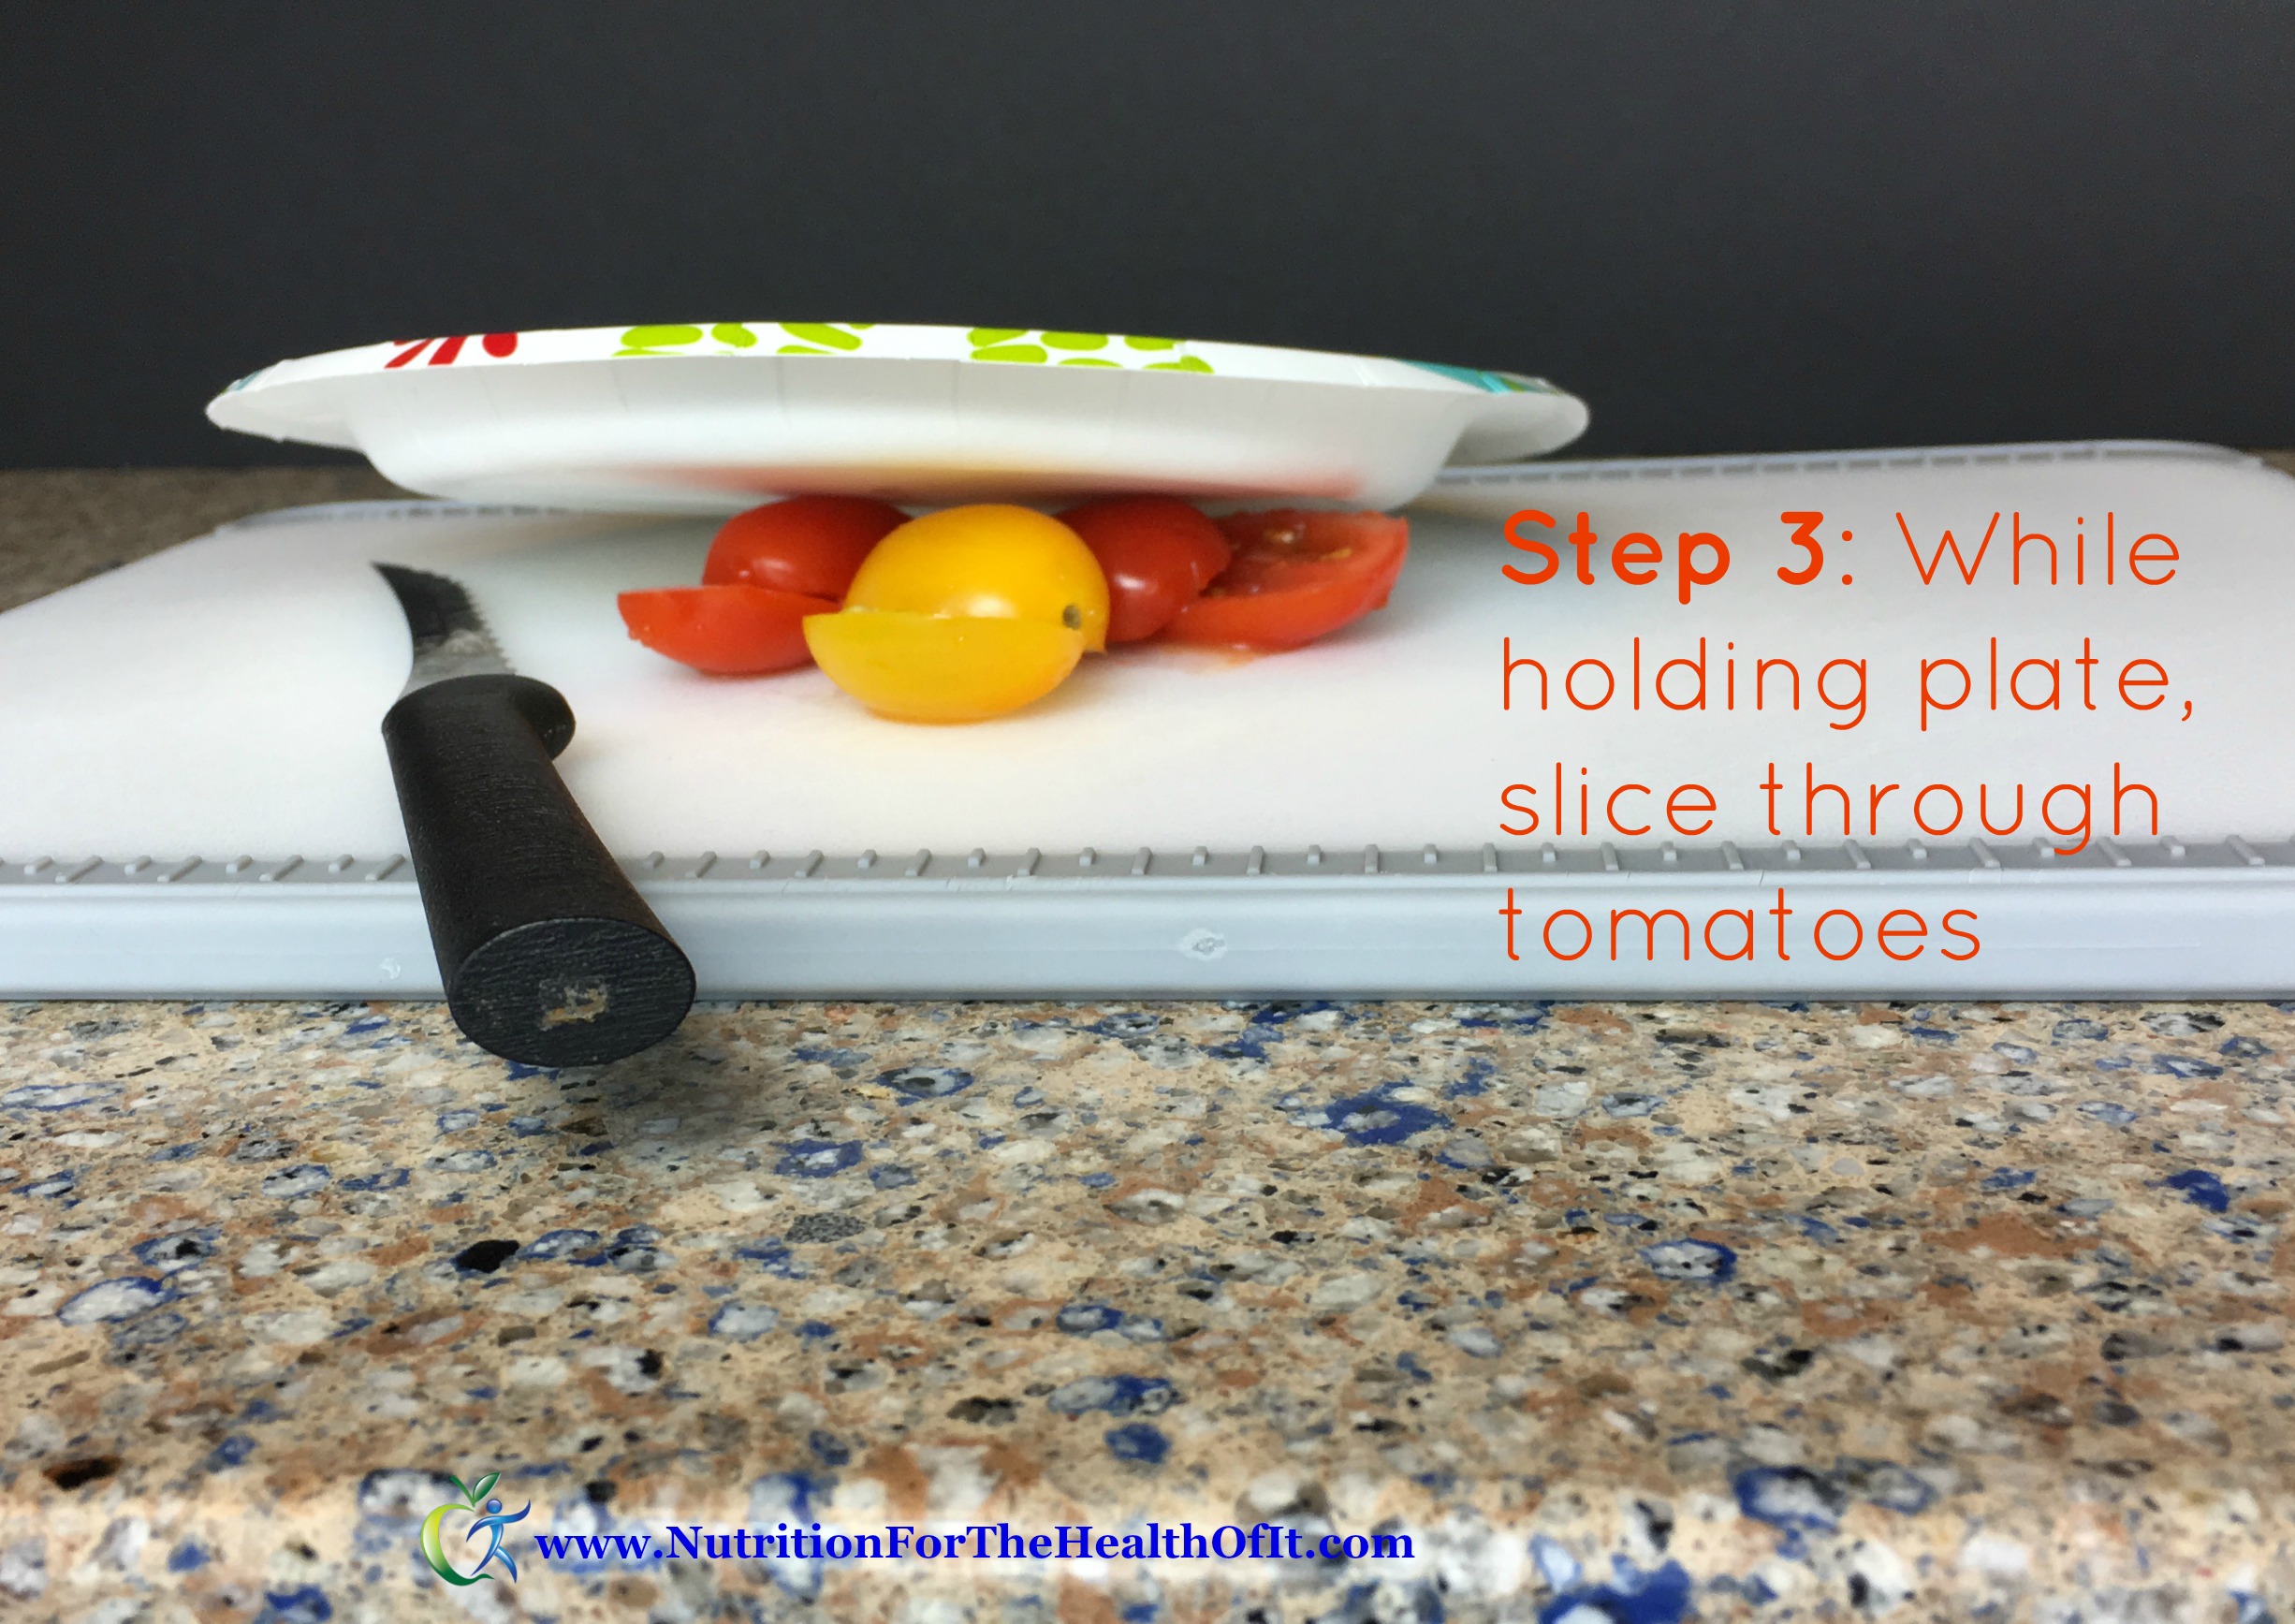 Step 3 - While holding plate, slice through tomatoes